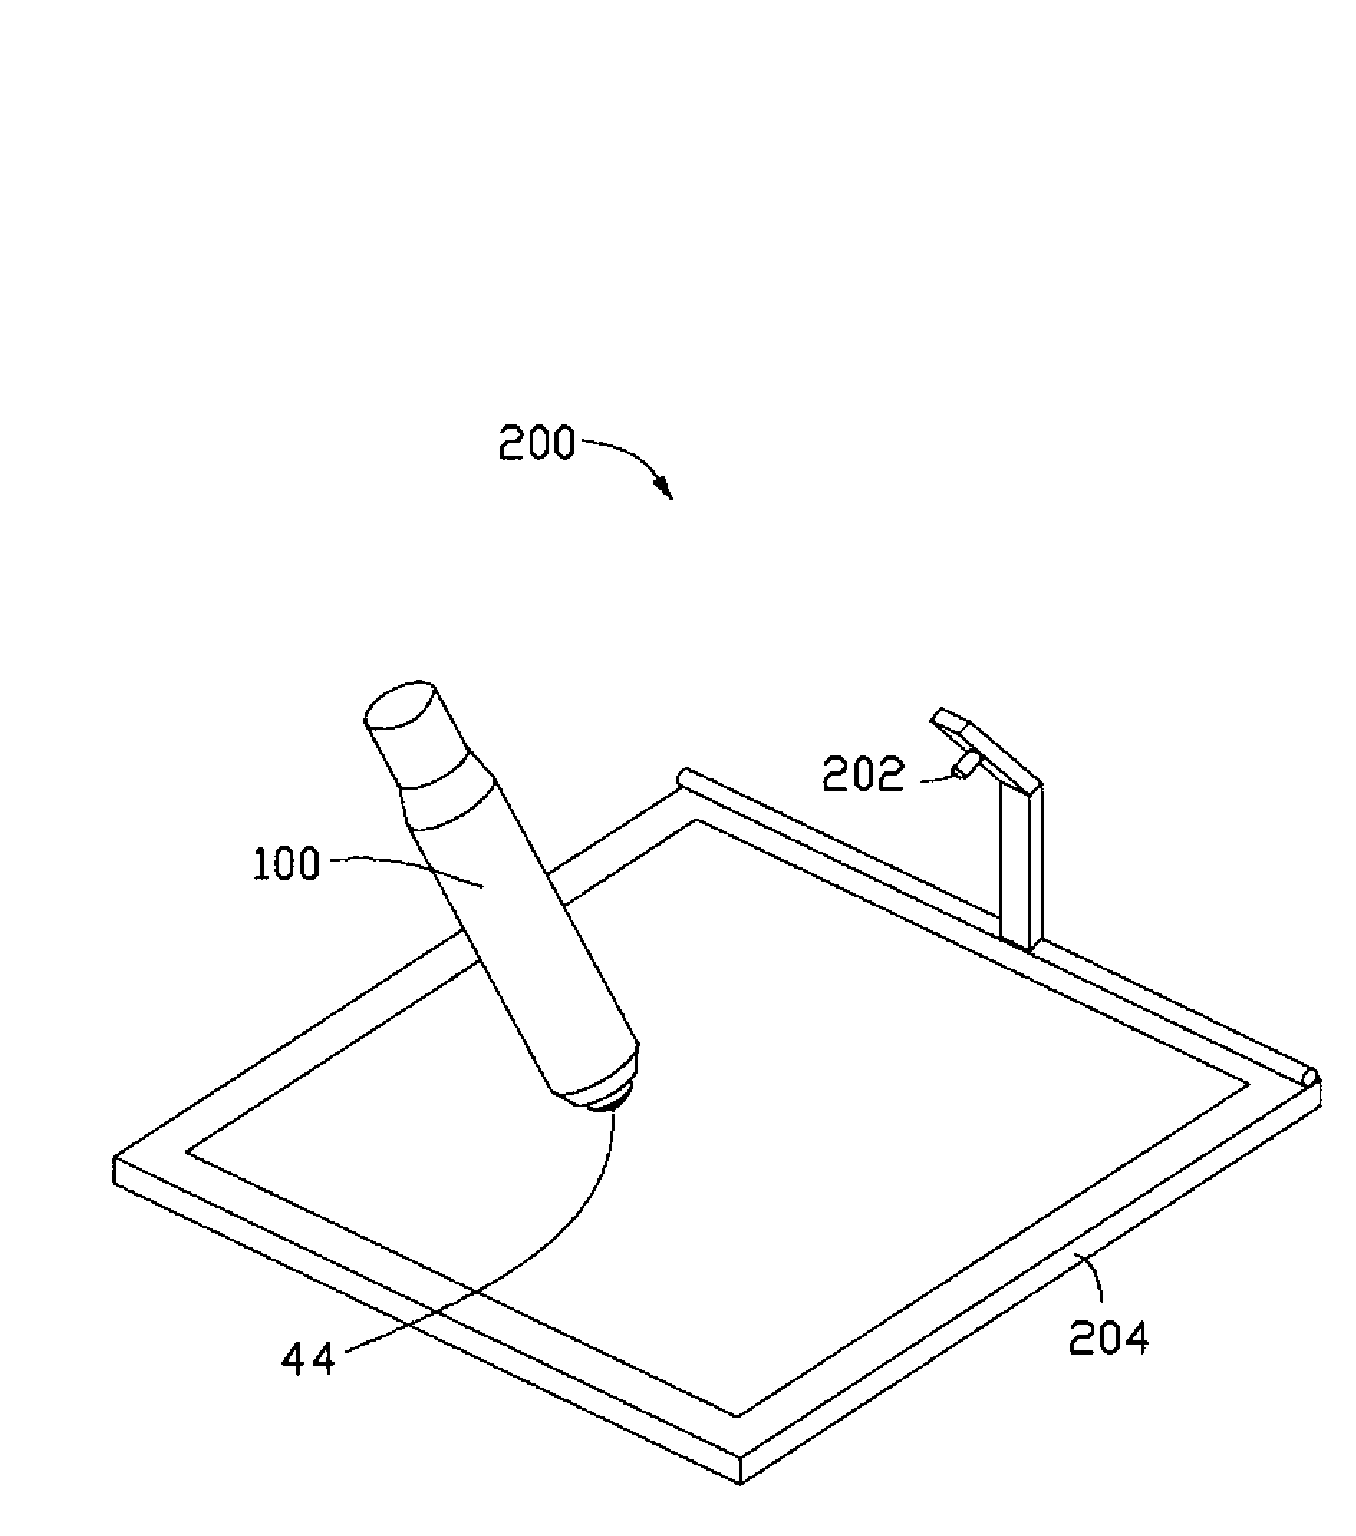 Hand input light pen and optical touch control system with same